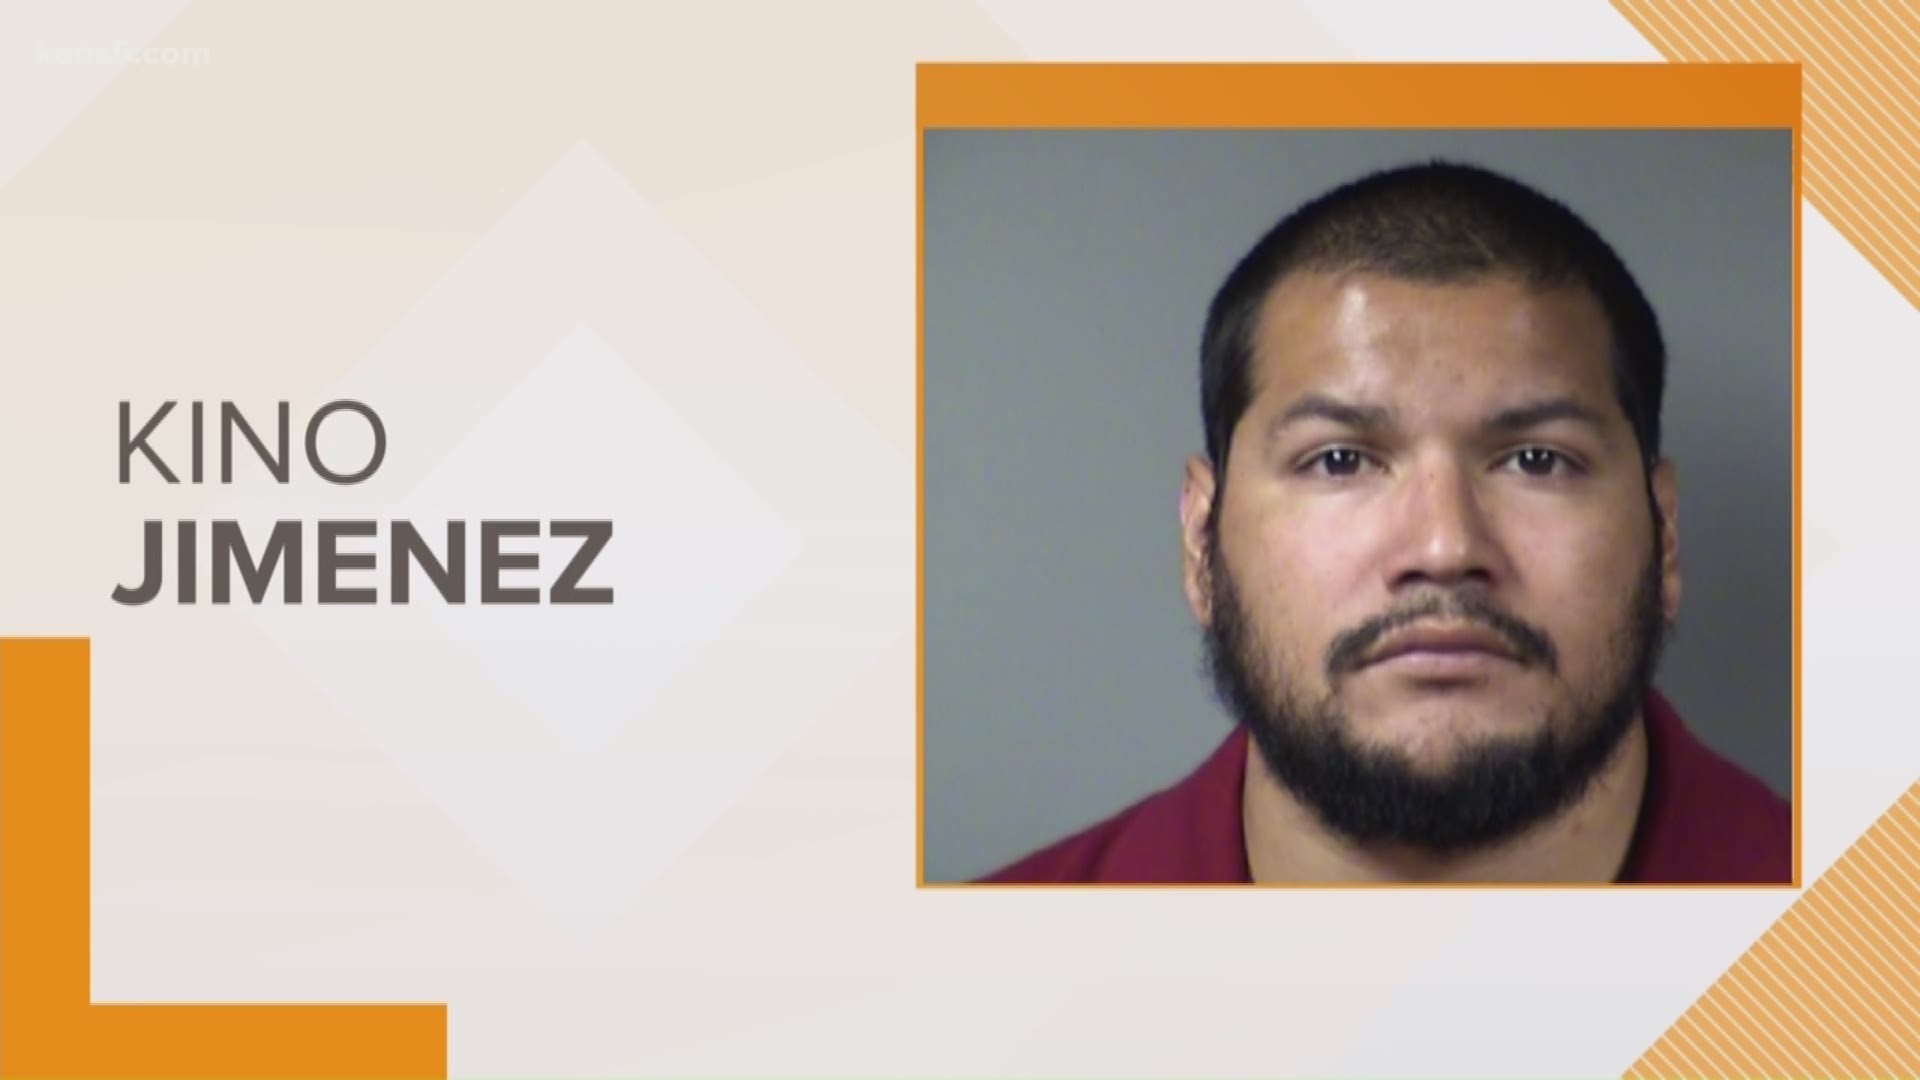 The San Antonio Police Department announced late Thursday that 30-year-old Kino Jimenez has been arrested and charged with theft. SAPD says that Jimenez was arrested at his home in Universal City without incident.